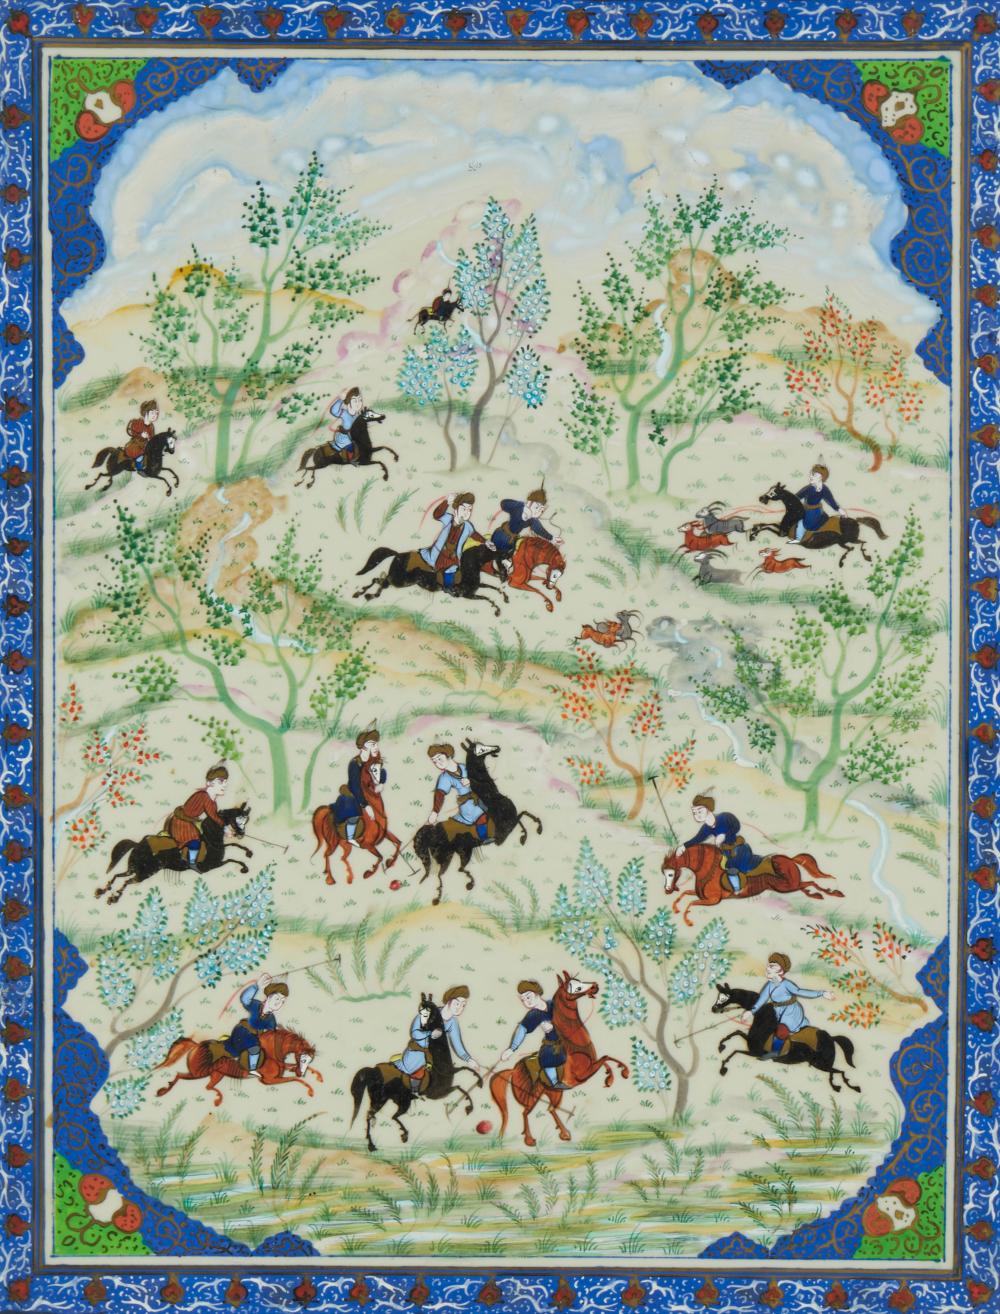 A PERSIAN PAINTING ON IVORINEA 2ee895